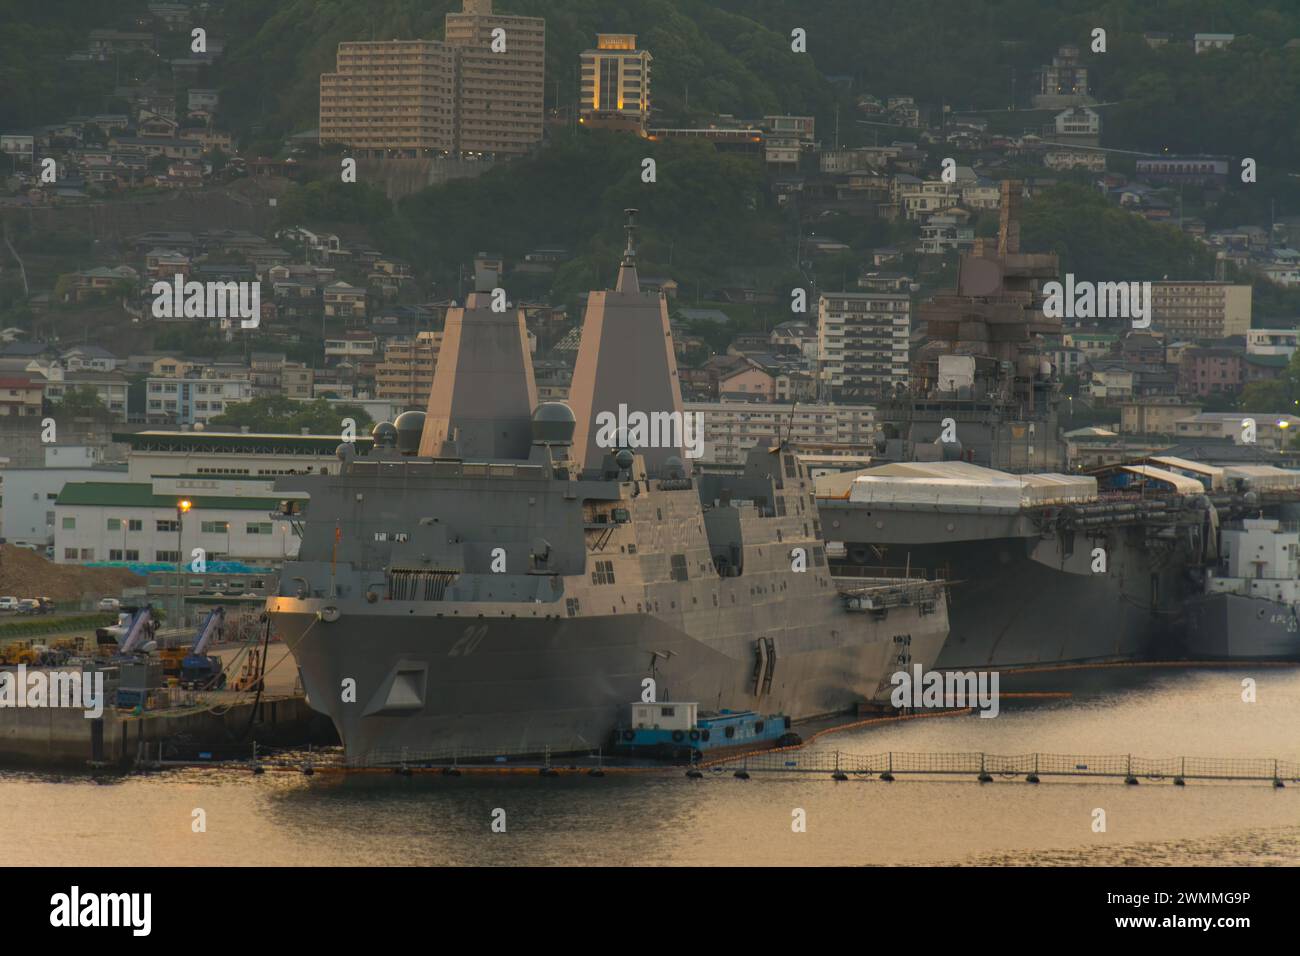 Okinawa, Japan - 12 May, 2016 : View of the USS Green Bay, an amphibious transport dock ship berthed at the Naha port in Okinawa. Stock Photo